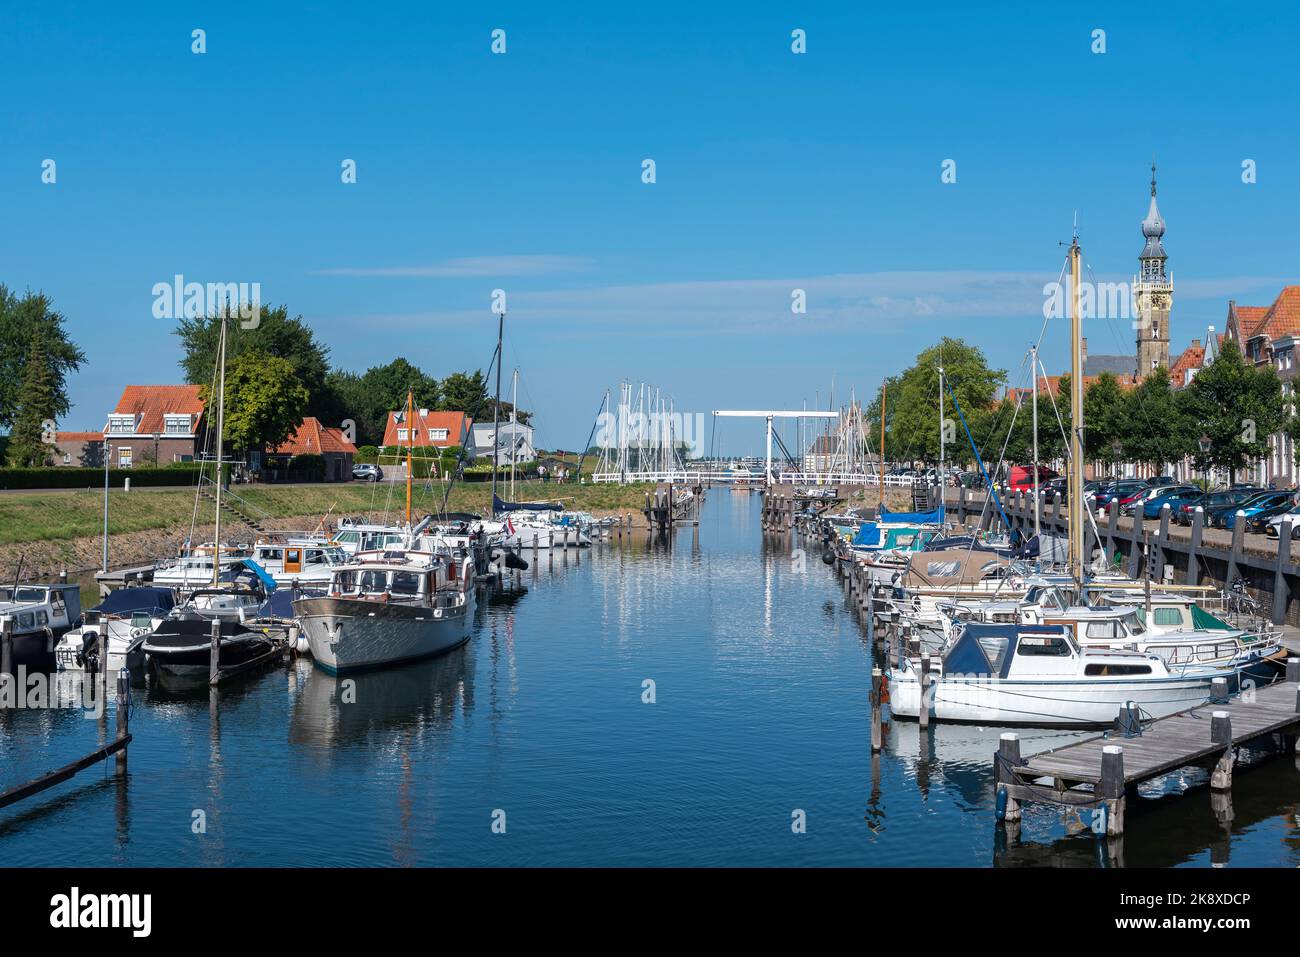 Marina with historic town hall in the background, Veere, Zeeland, Netherlands, Europe Stock Photo